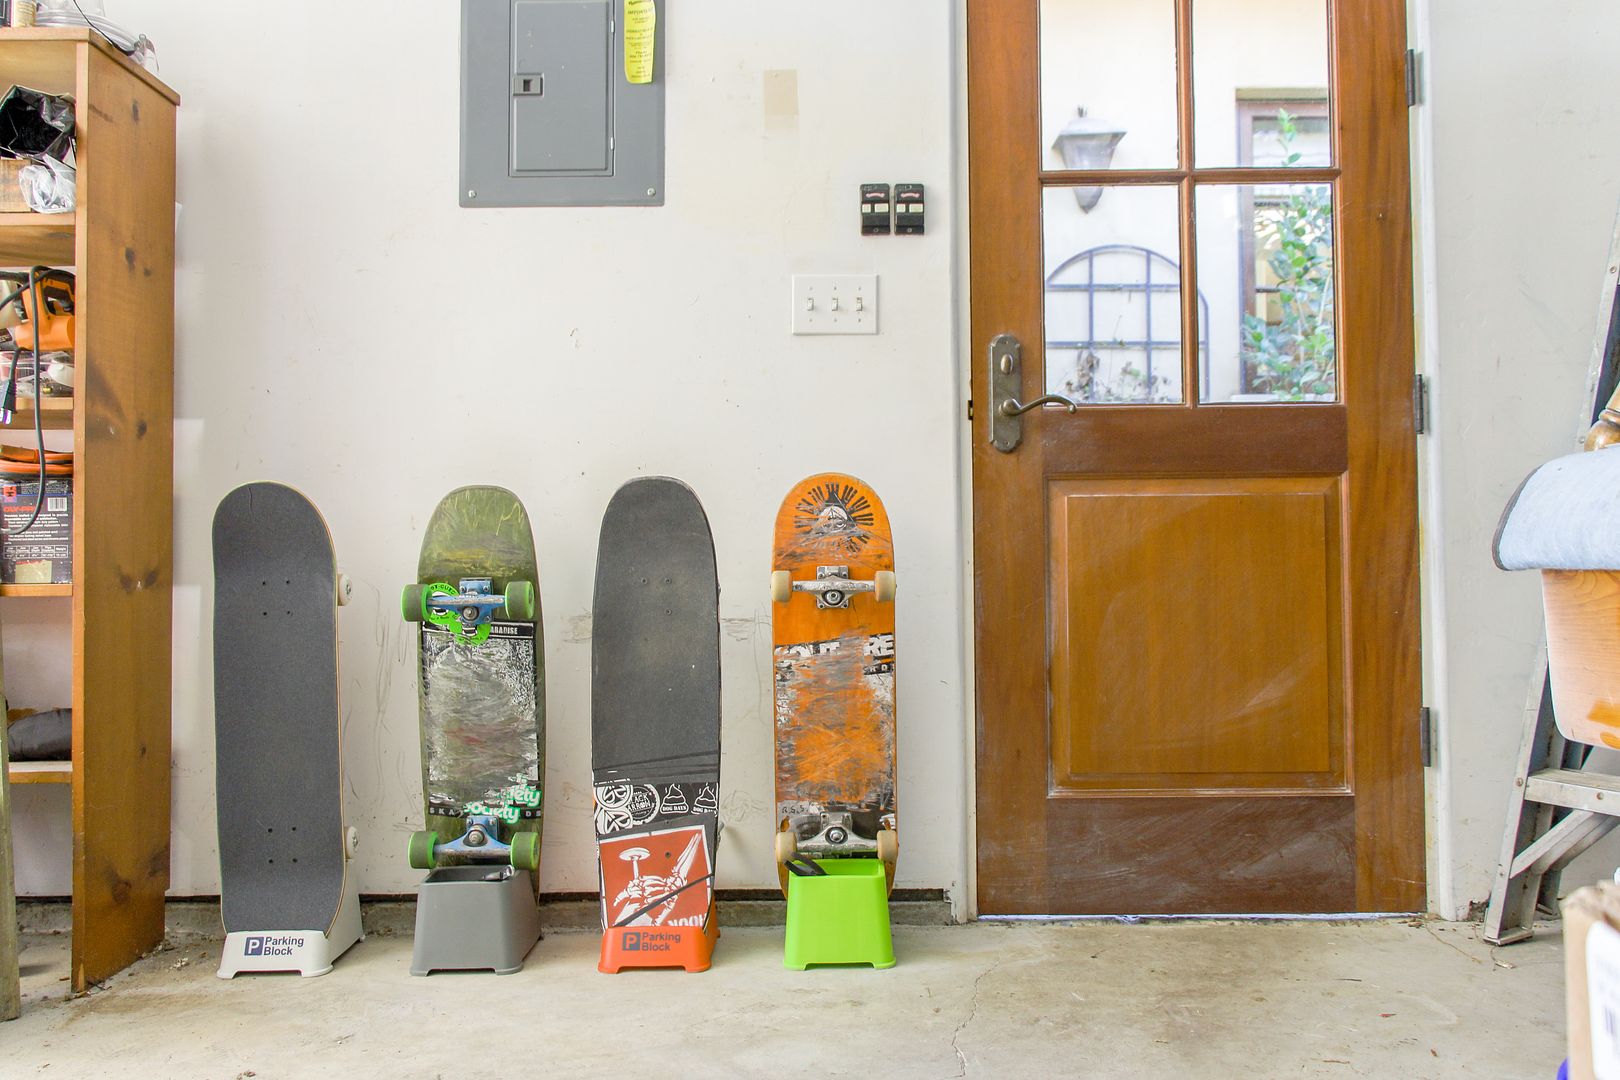 The Parking Block: A brand new skateboard stand that keeps boards safely off the floor, with wheels off the wall too.